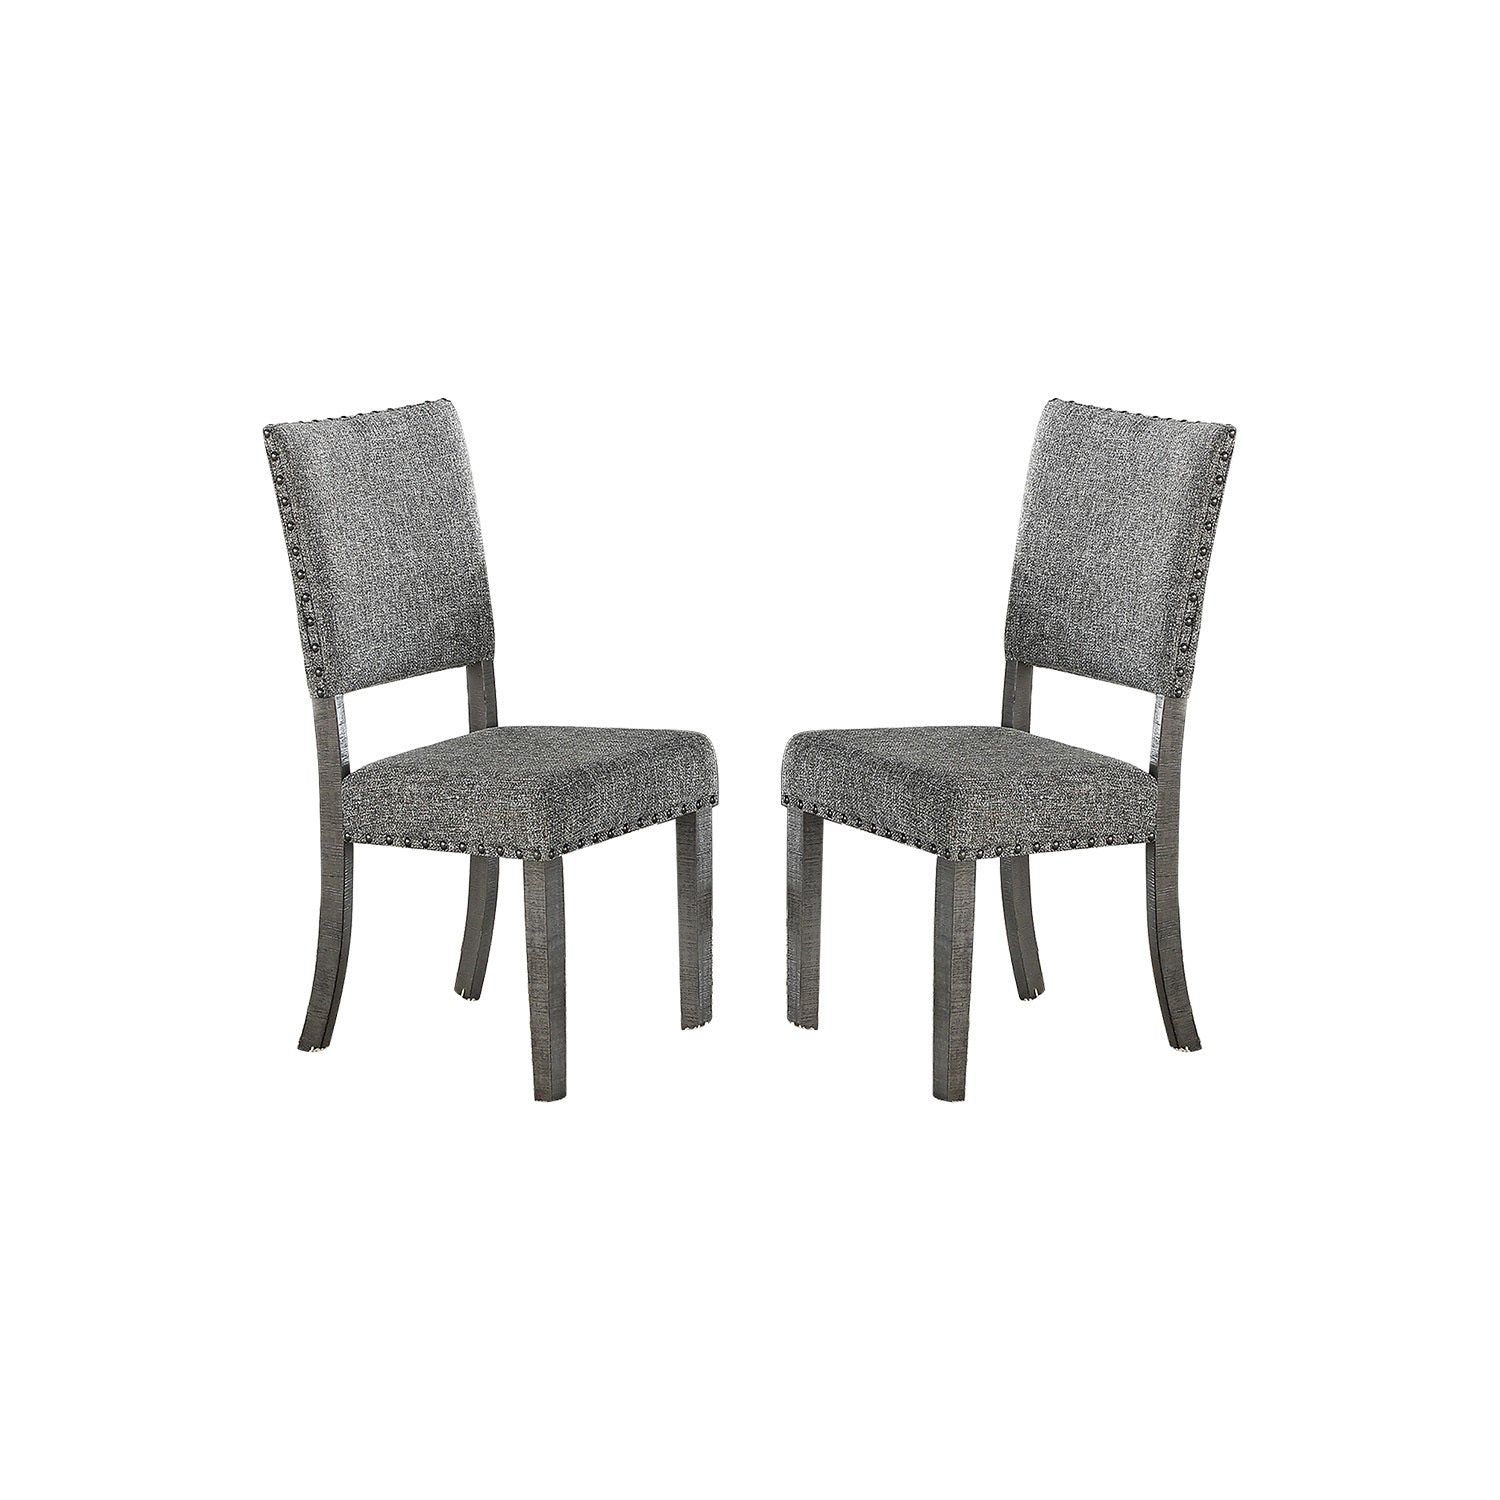 Set of 2 Upholstered Fabric Dining Chairs, Grey solid-grey-solid back-solid wood